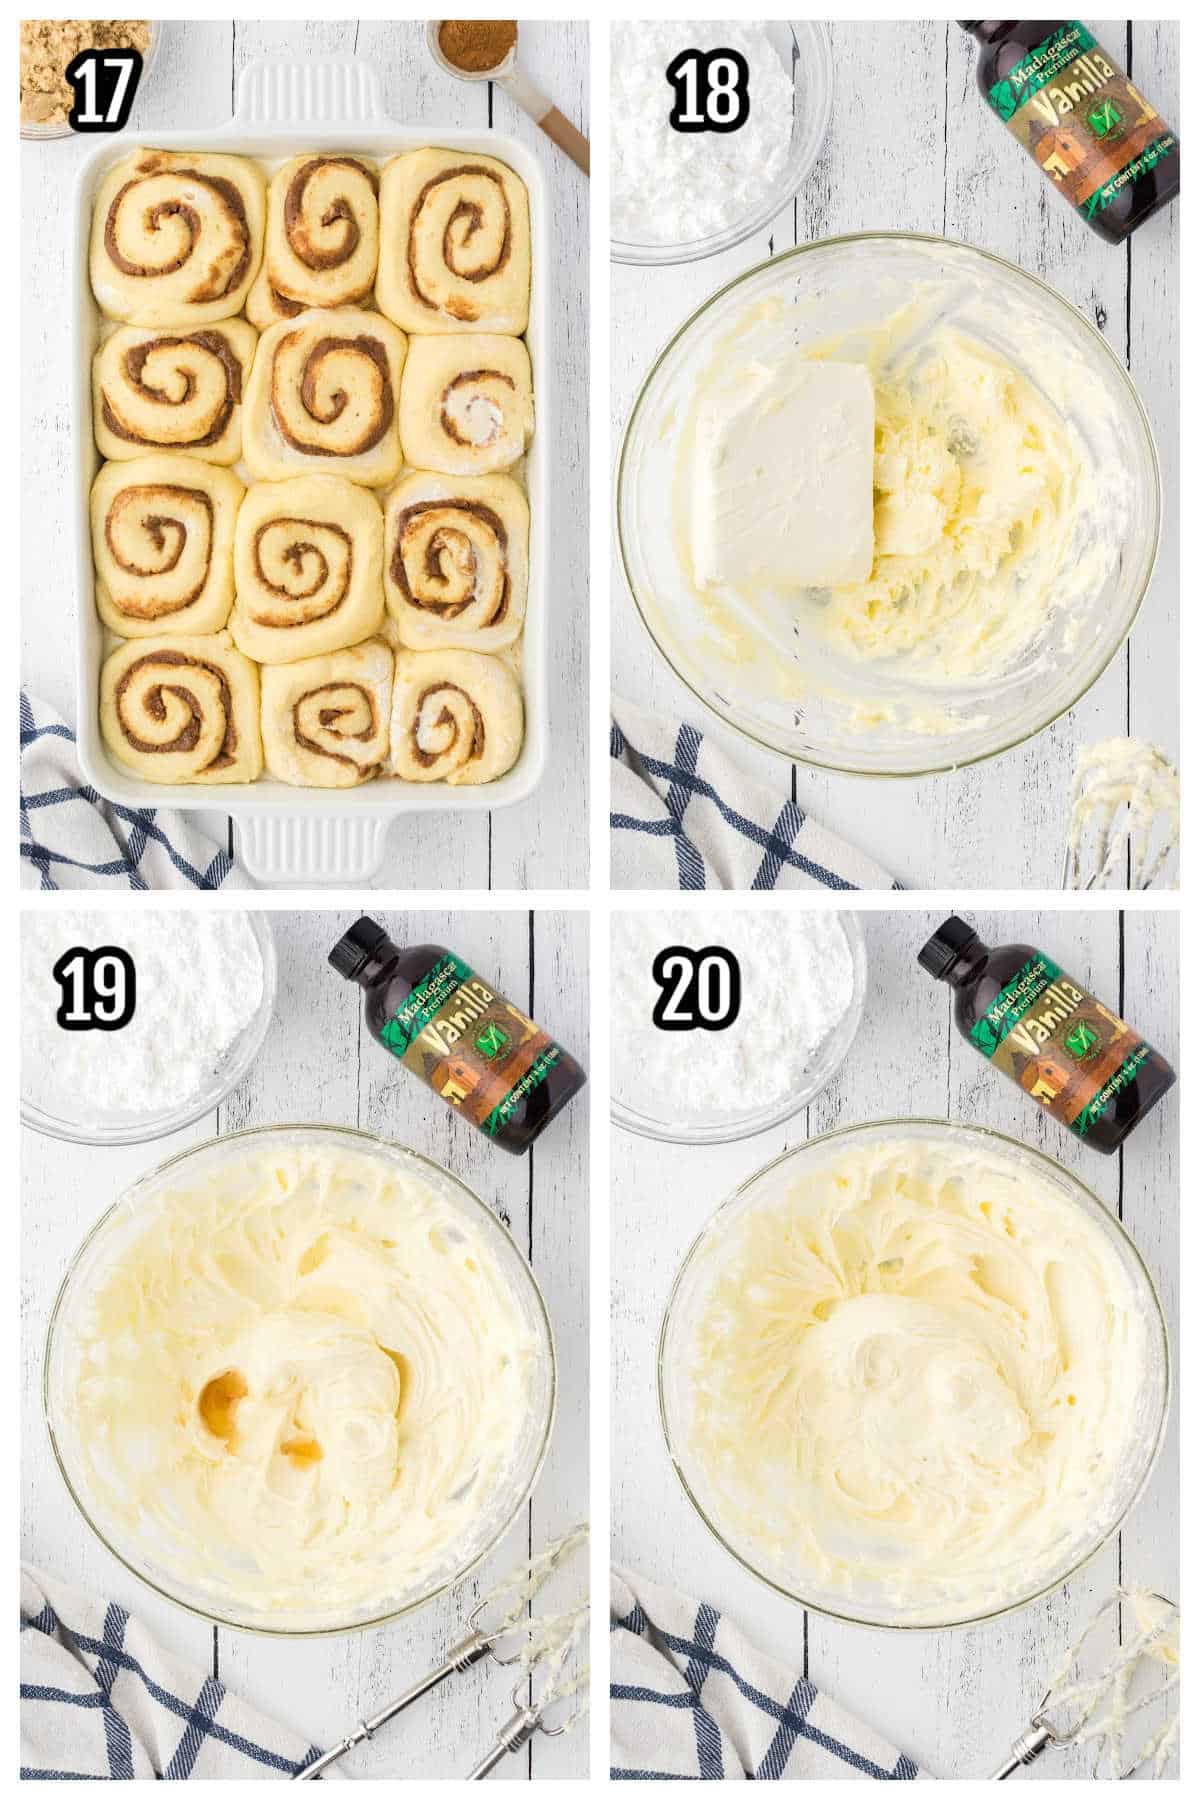 The fifth collage shows the roll's rise and how to assemble the frosting. 